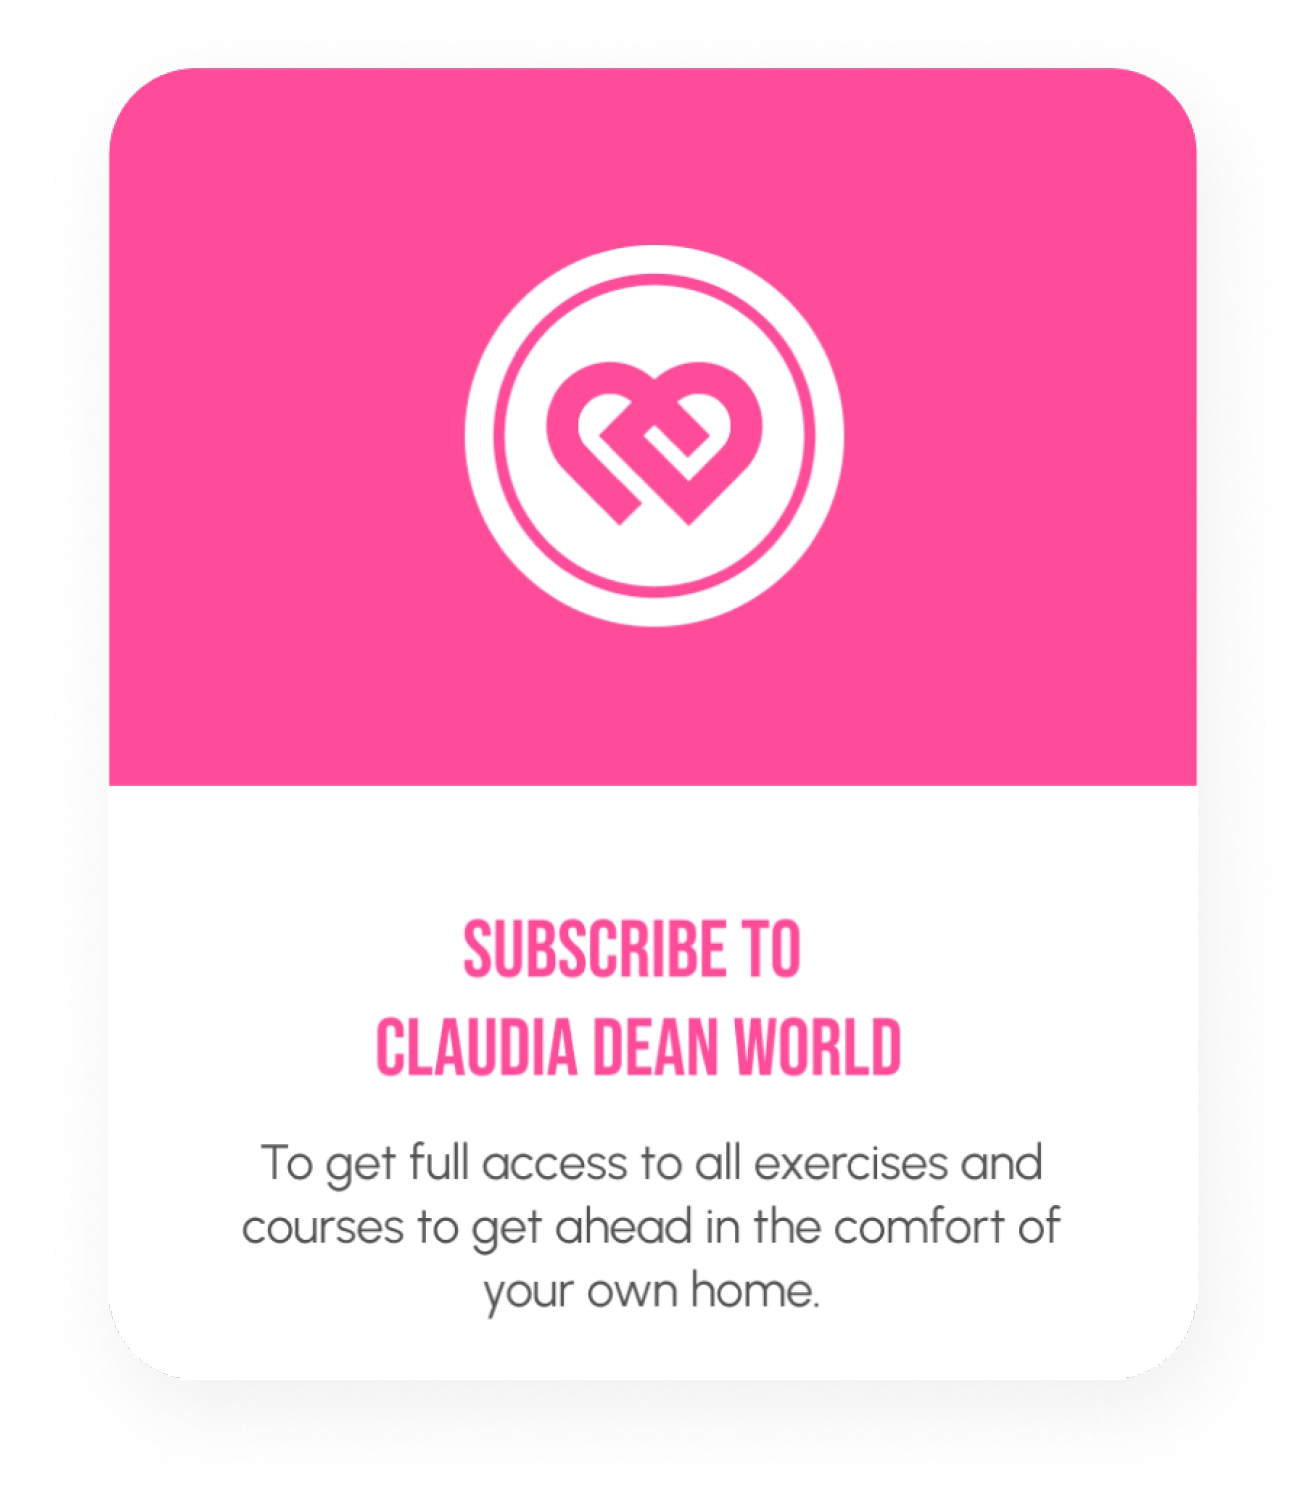 Class with Claudia World Tour – Claudia Dean World